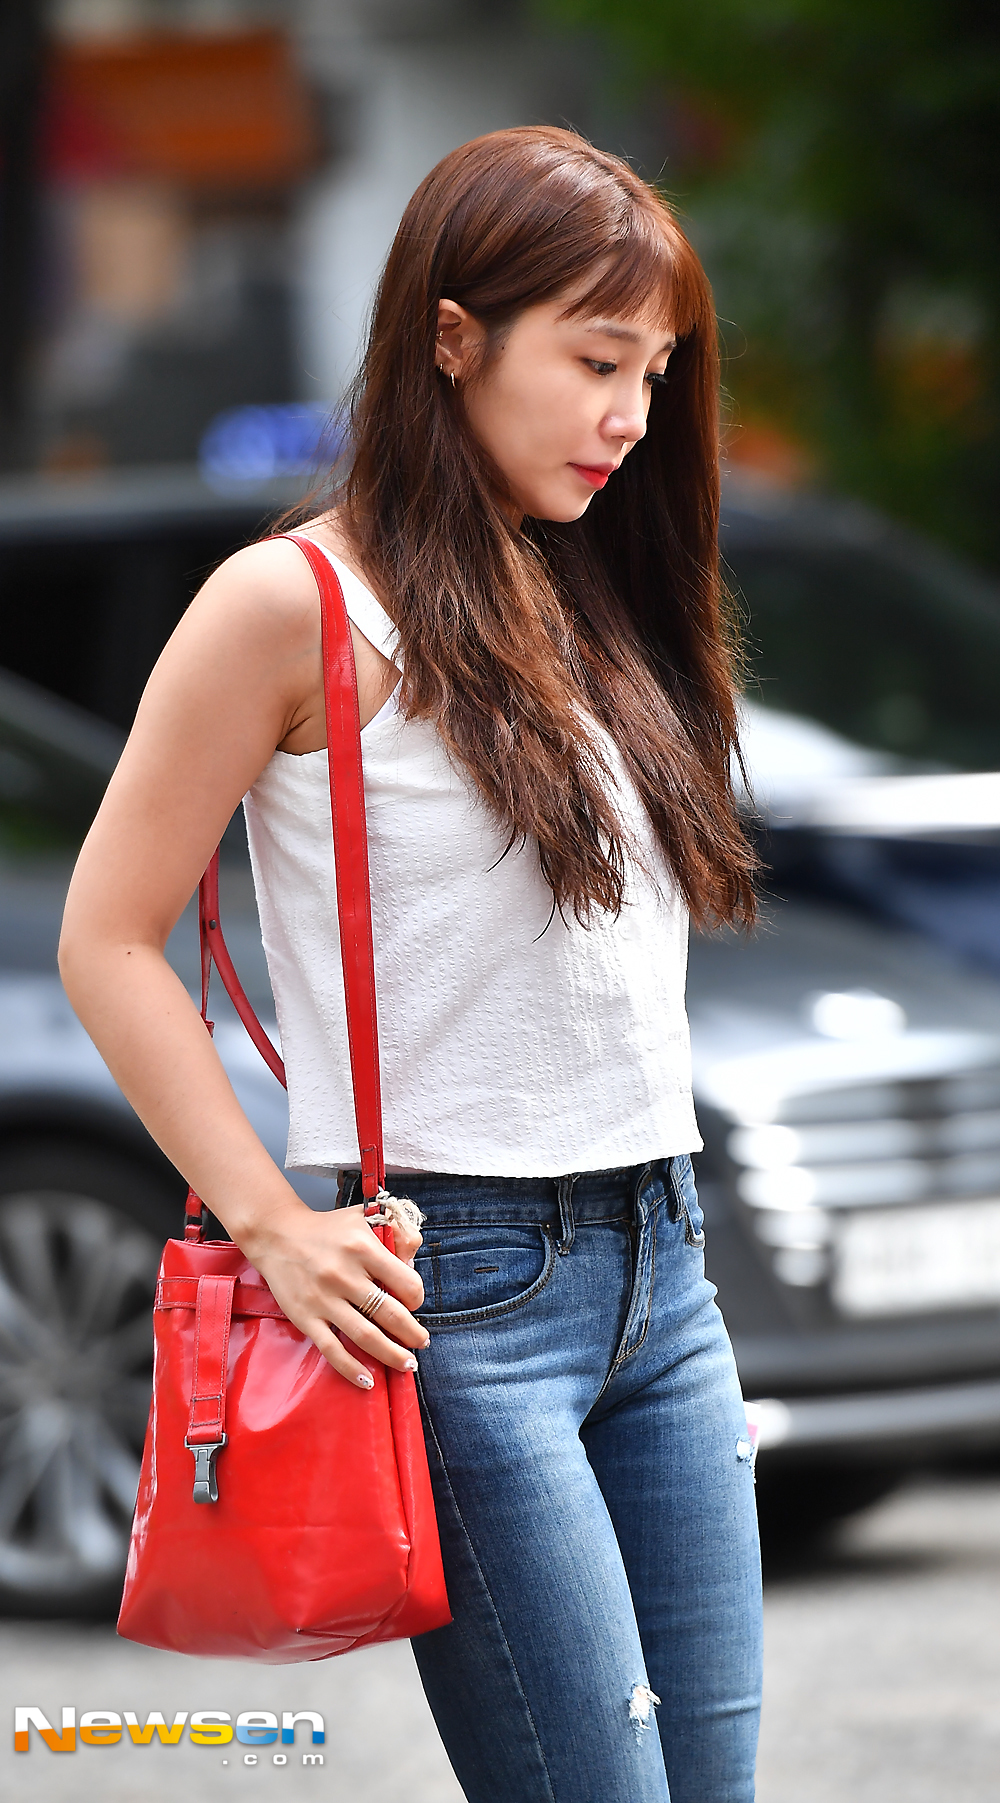 KBS 2TV Music Bank rehearsal was held at the public hall of KBS New Pavilion in Yeouido, Yeongdeungpo-gu, Seoul on July 6.Apink Jung Eun-ji attended the rehearsal on the dayexpressiveness